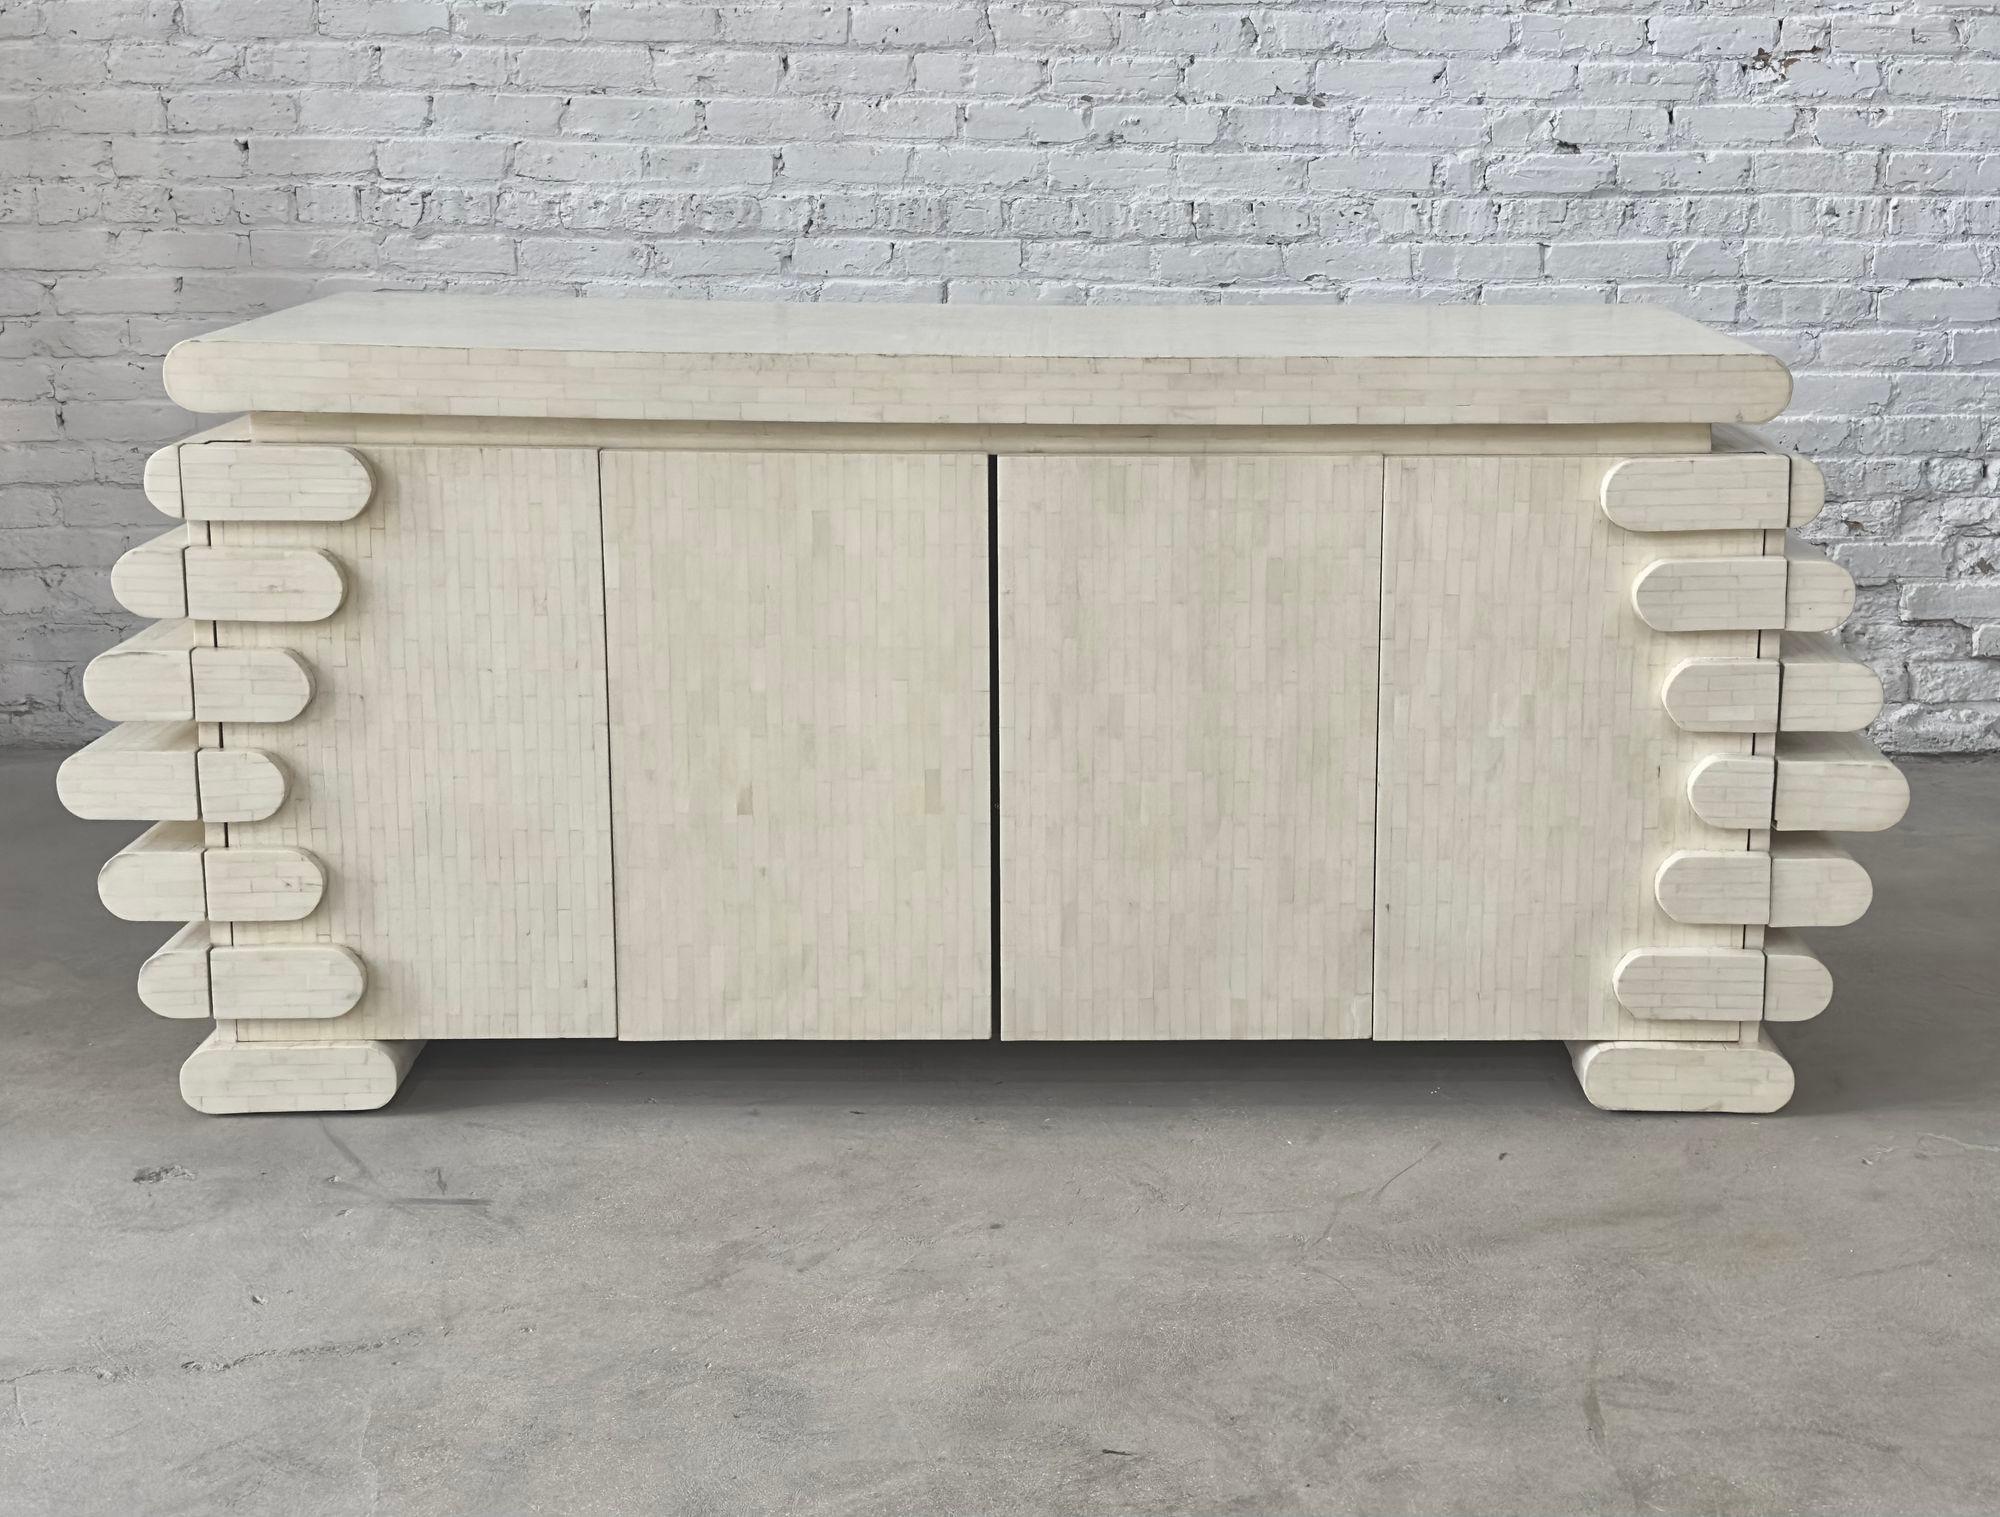 Enrique Garcel Tessellated Bone Credenza/Sideboard, 1980. Restored and in beautiful condition. Stunning piece.

